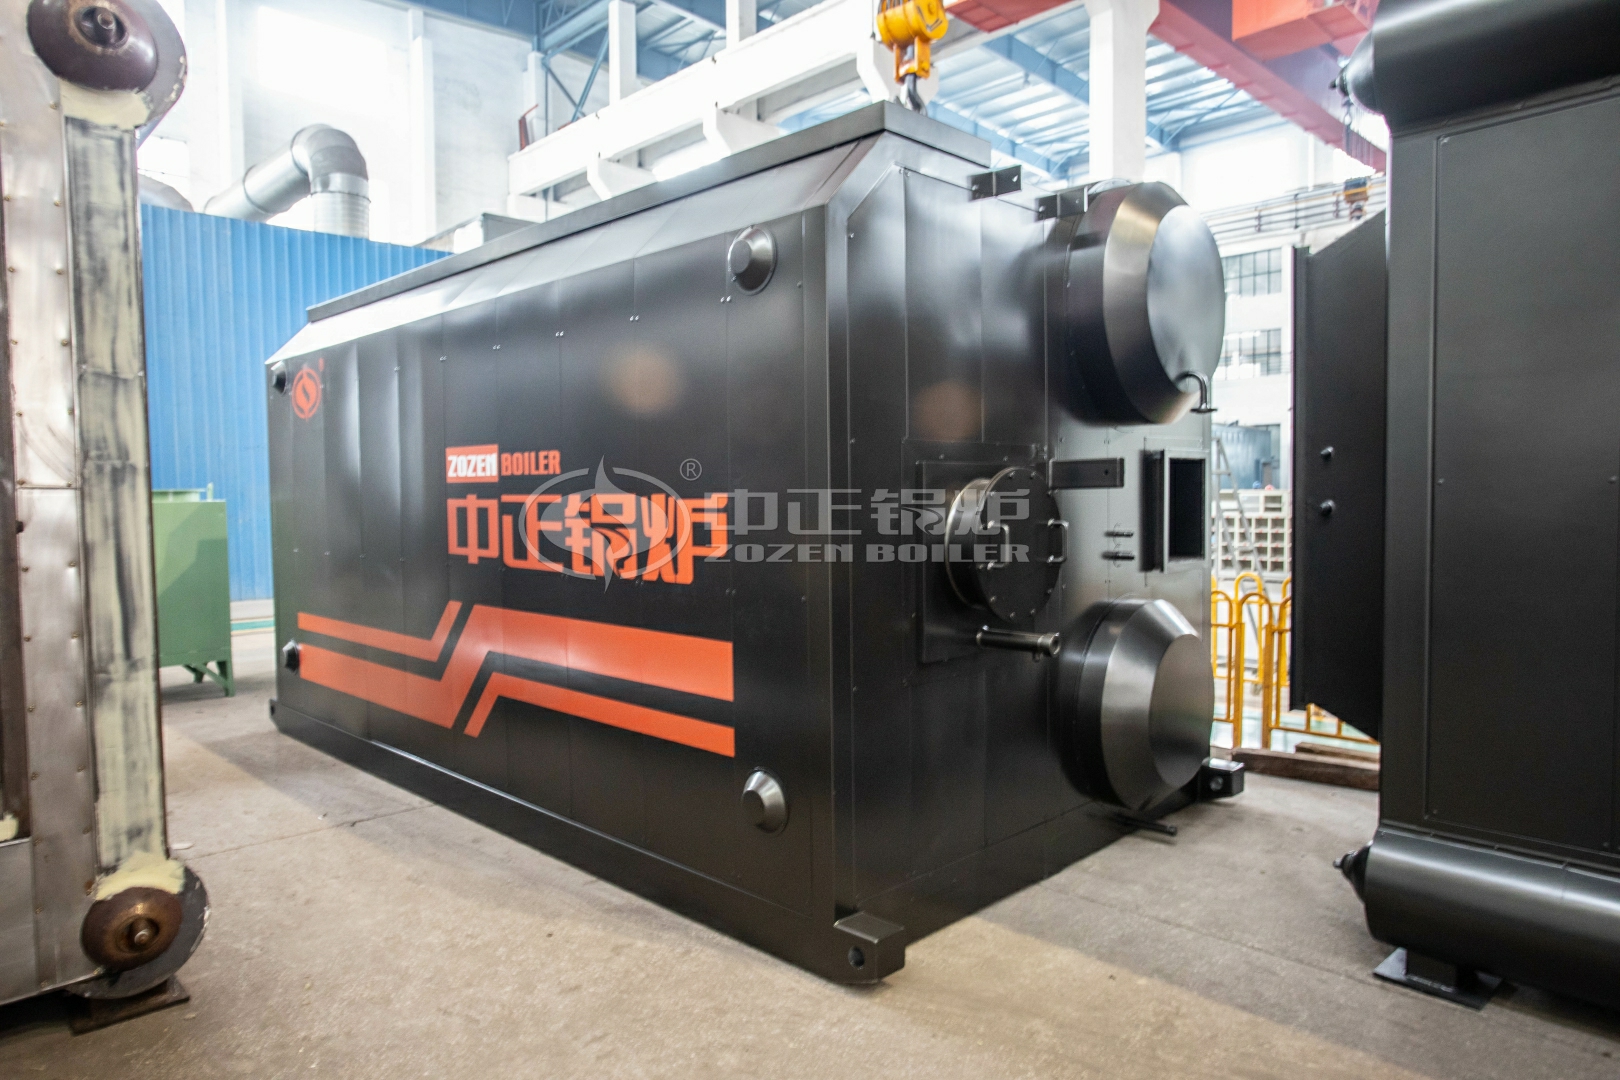 Factors Affecting Oil Fired Boilers Prices